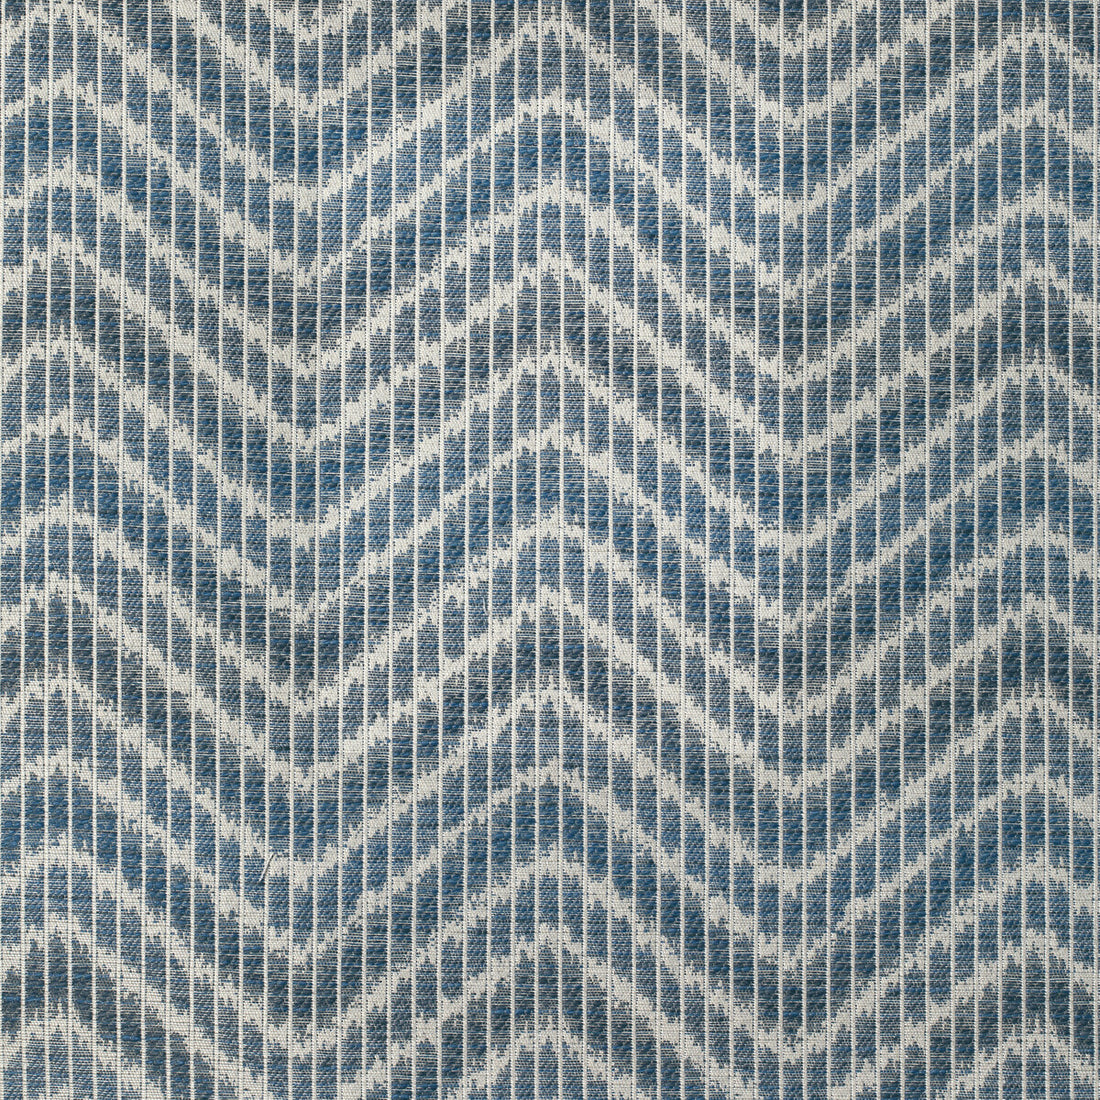 Chausey Woven fabric in navy color - pattern 8020106.50.0 - by Brunschwig &amp; Fils in the Granville Weaves collection